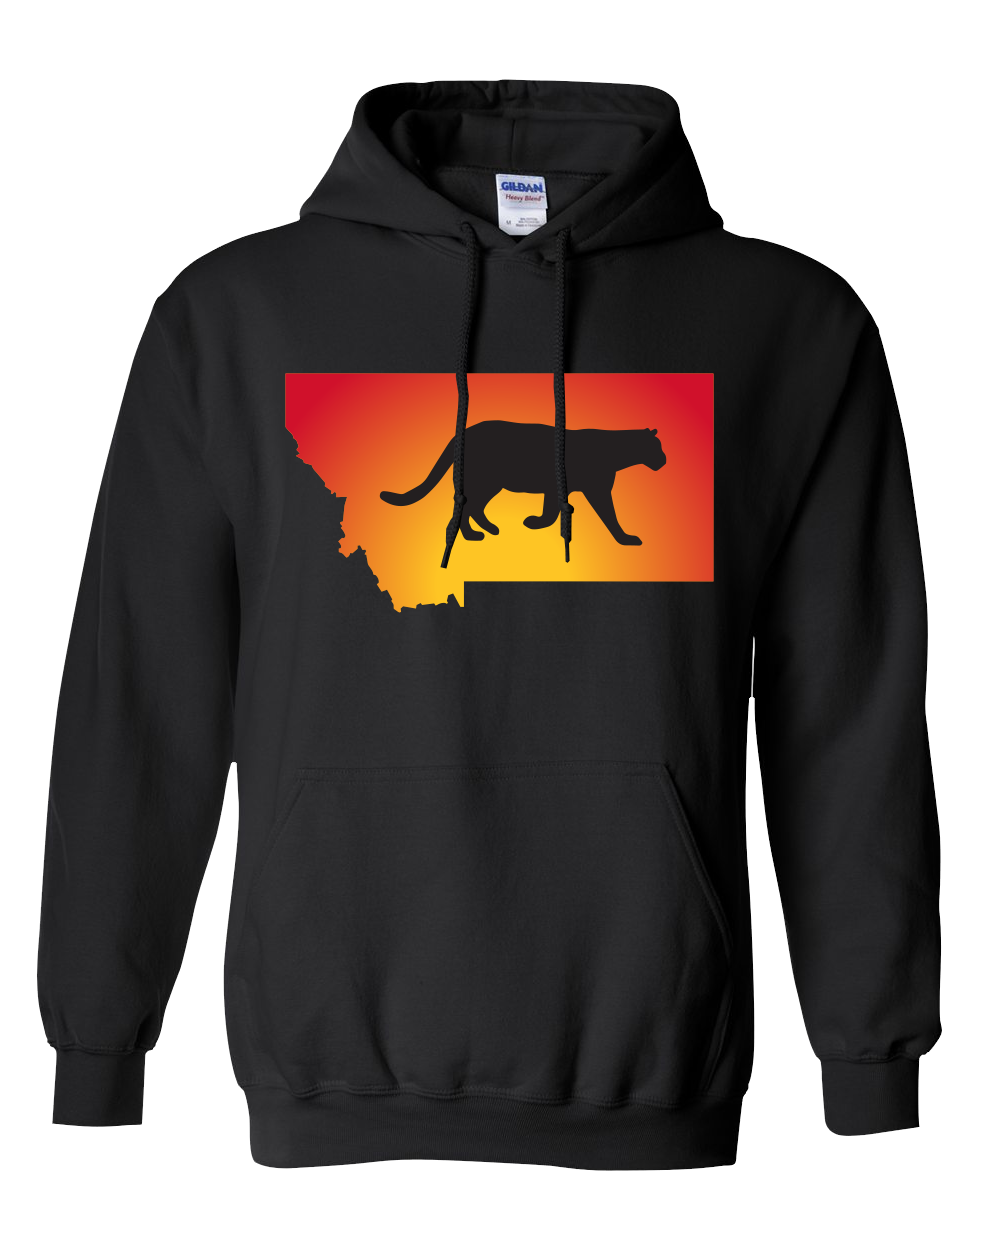 Pullover Hooded Sweatshirt Montana Black Mountain Lion Vibrant Design High Quality Tight Knit Ring Spun Low Maintenance Cotton Printed With The Newest Available Color Transfer Technology